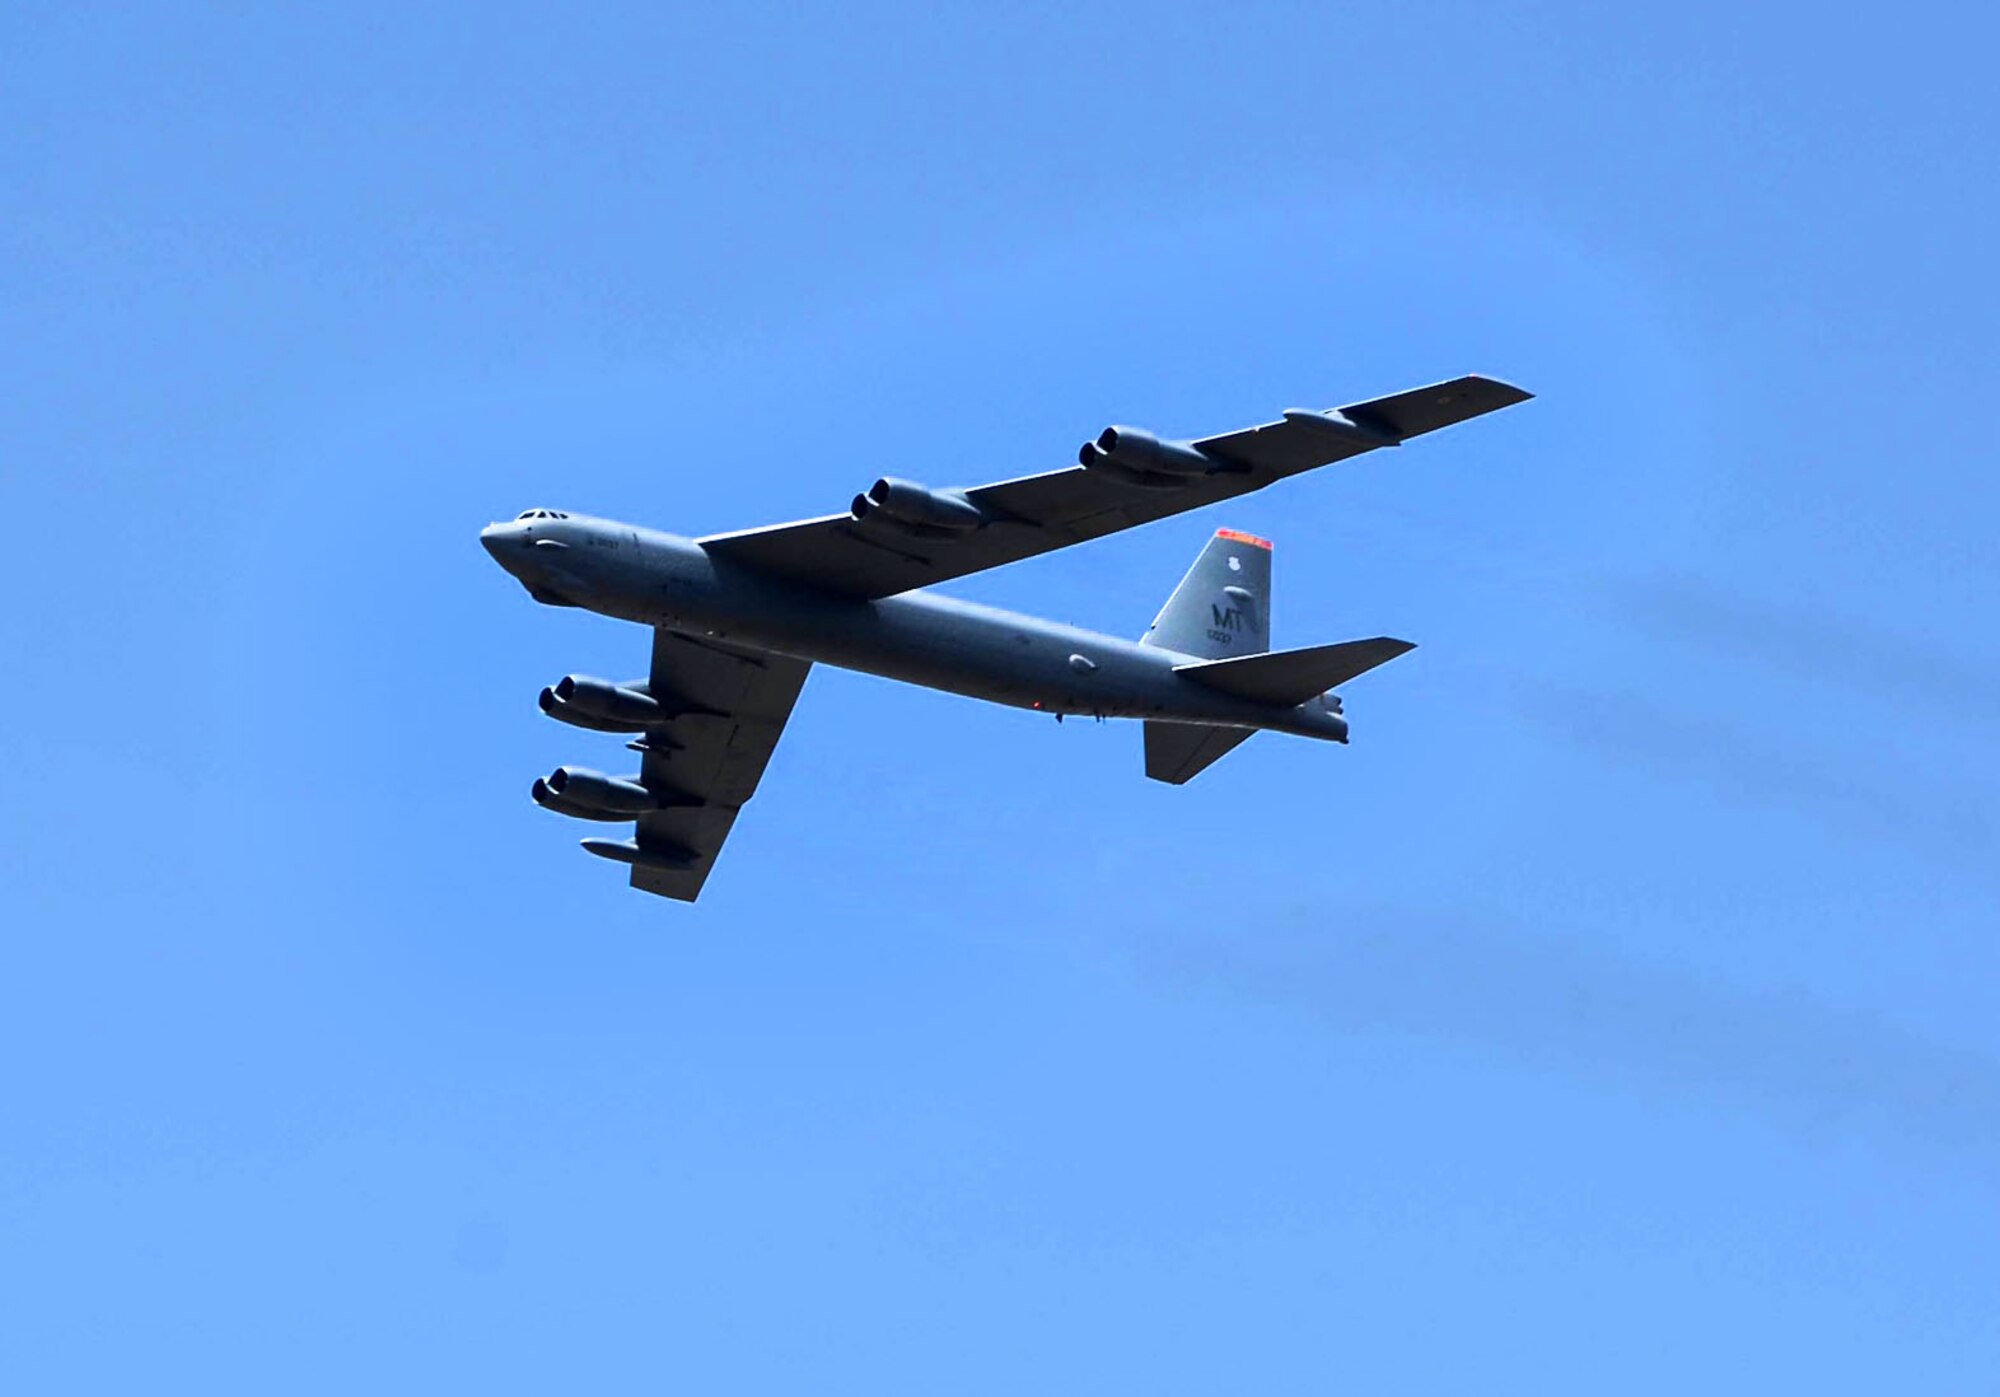 A U.S. Air Force B-52 Stratofortress can be seen flying over the Jose Maria Cordova International Airport during a flyover demonstration at the Colombian International Air Festival, July 9, 2015 in Rionegro, Colombia. The aircraft took off from its home station at Minot Air Force Base, N.D., to conduct a 16-hour, long-range training mission which included the flyover in Colombia. The B-52 Stratofortress is a long-range strategic aircraft capable of traveling 8,800 miles before refueling. (U.S. Air Force photo by MSgt. Kristina Newton/Released)